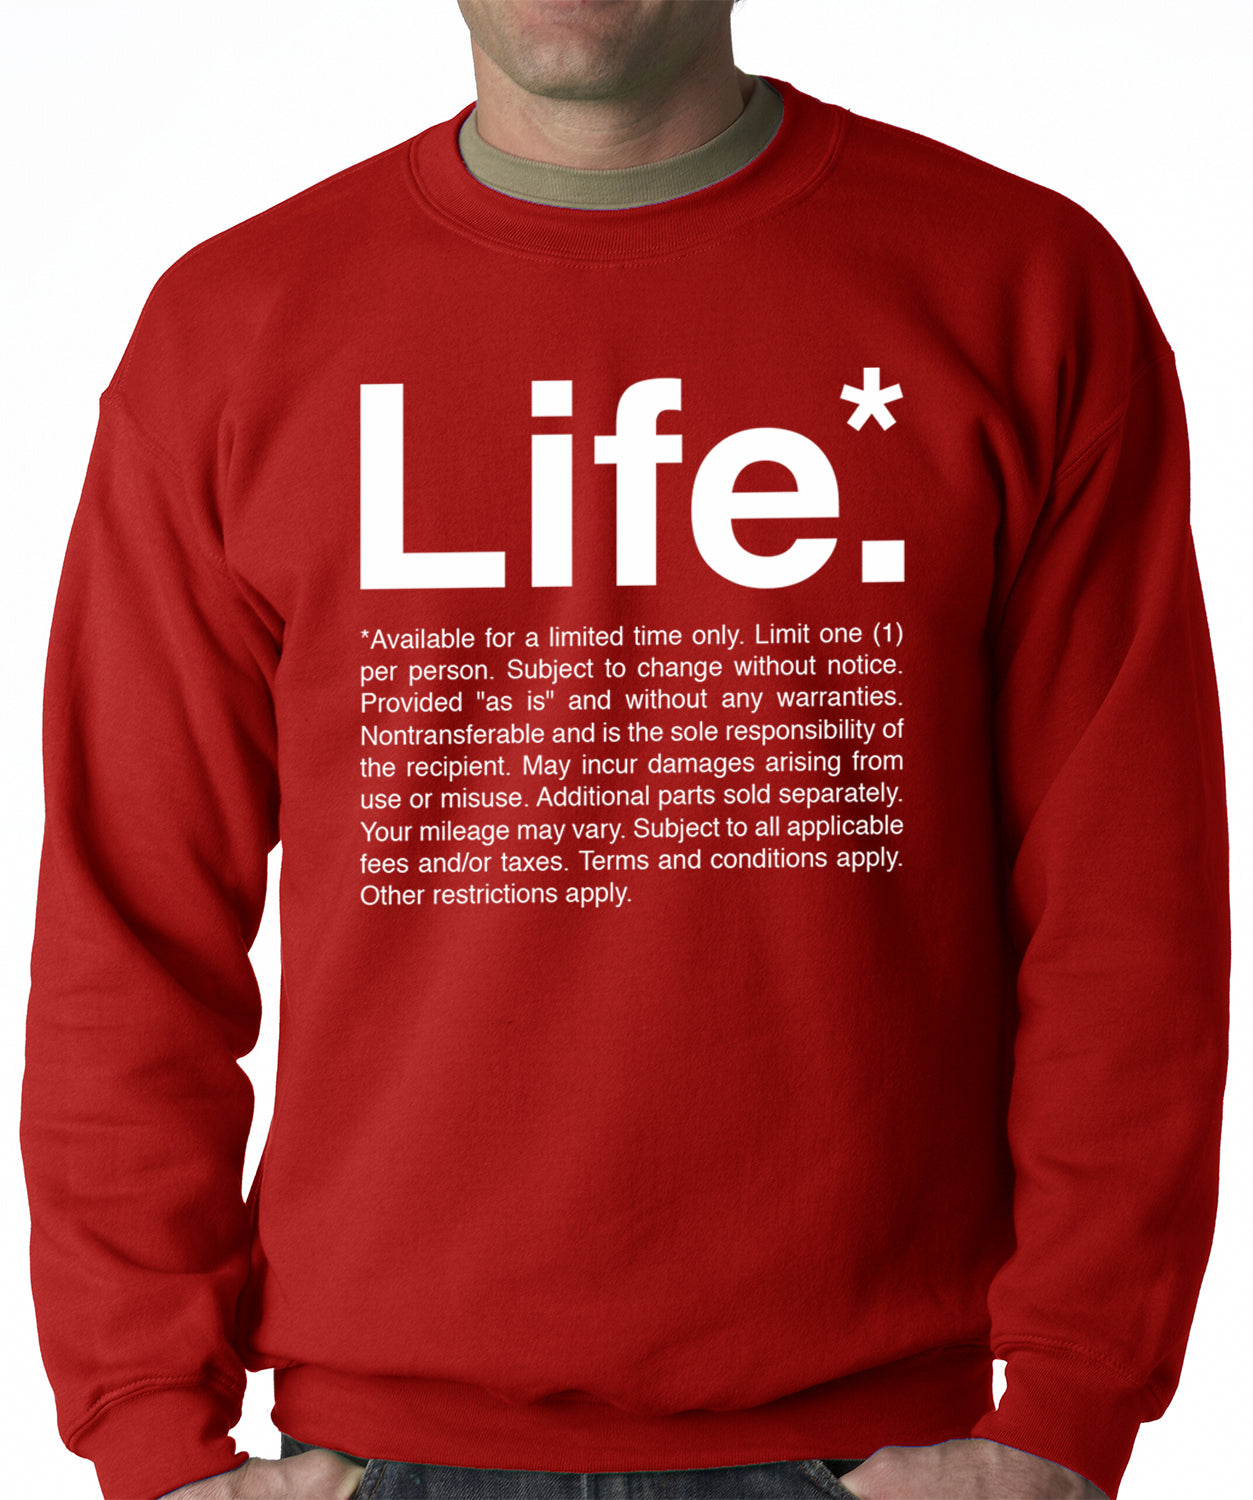 The Terms of Life Adult Crewneck